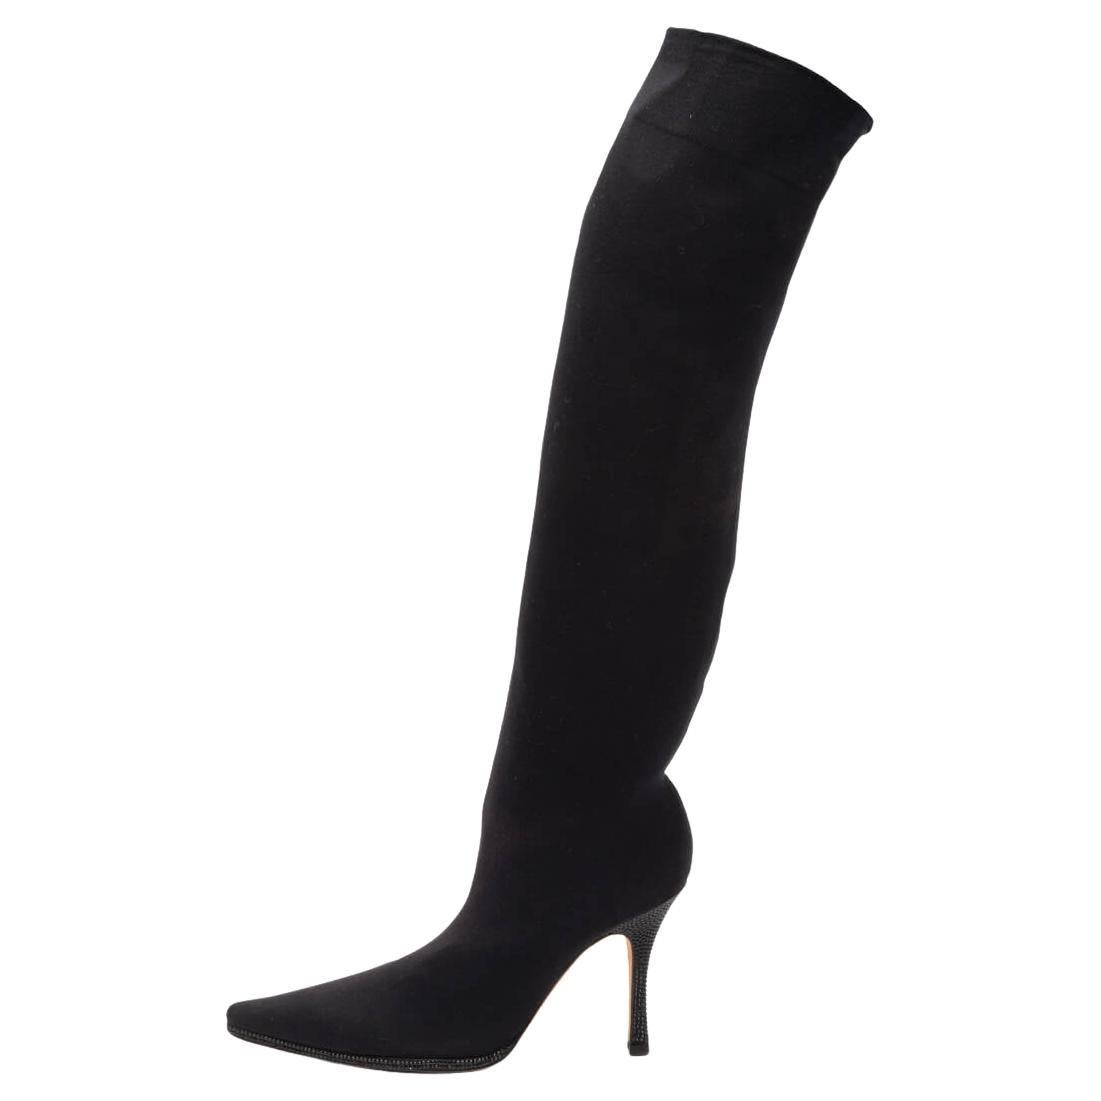 Pre-Loved Rene Caovilla Women's Crystal-Embellished Over-the-Knee Sock Boots 